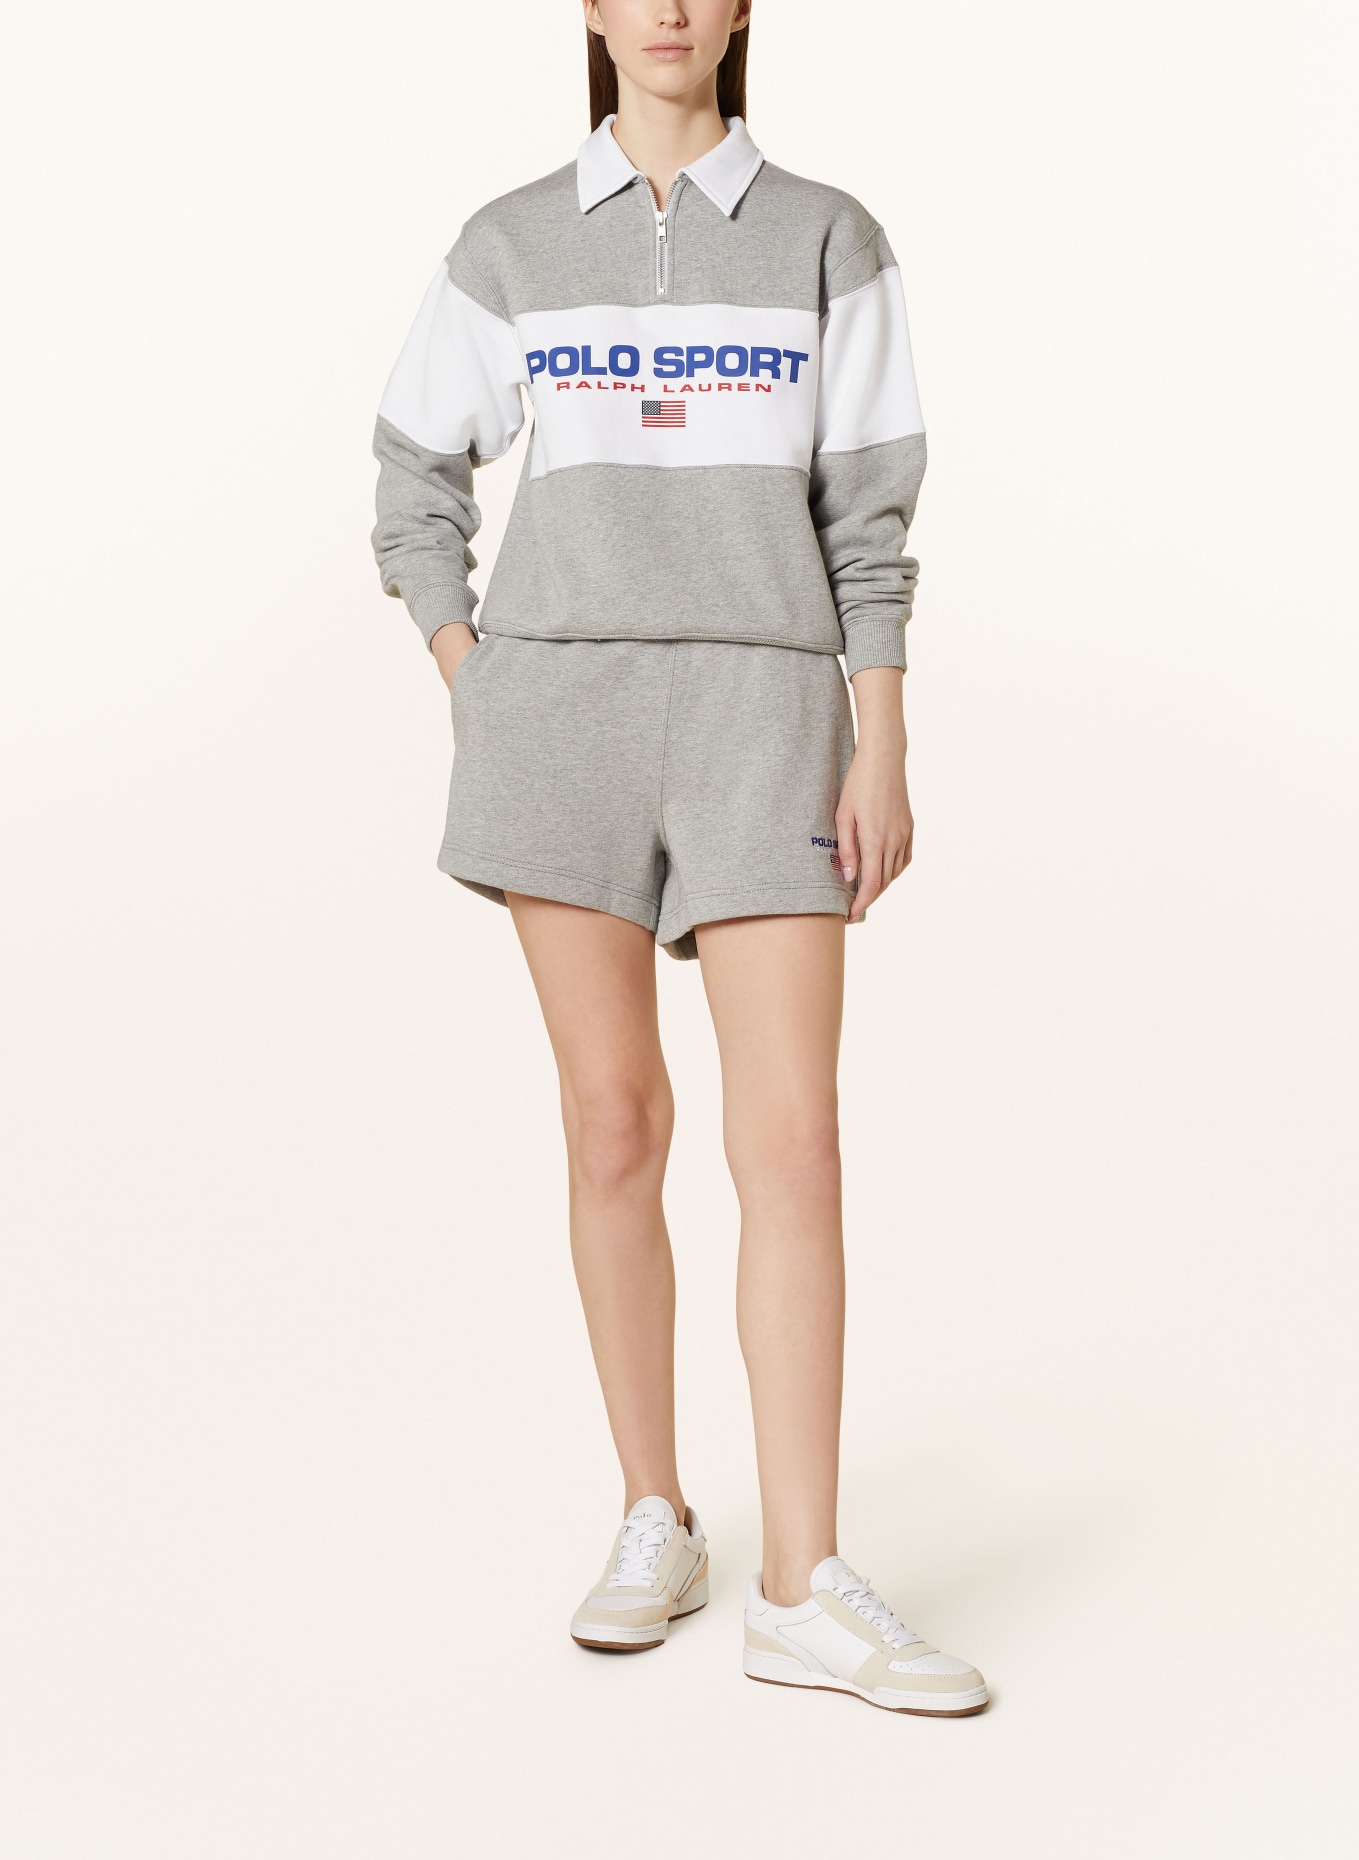 POLO SPORT Sweat shorts, Color: GRAY (Image 2)